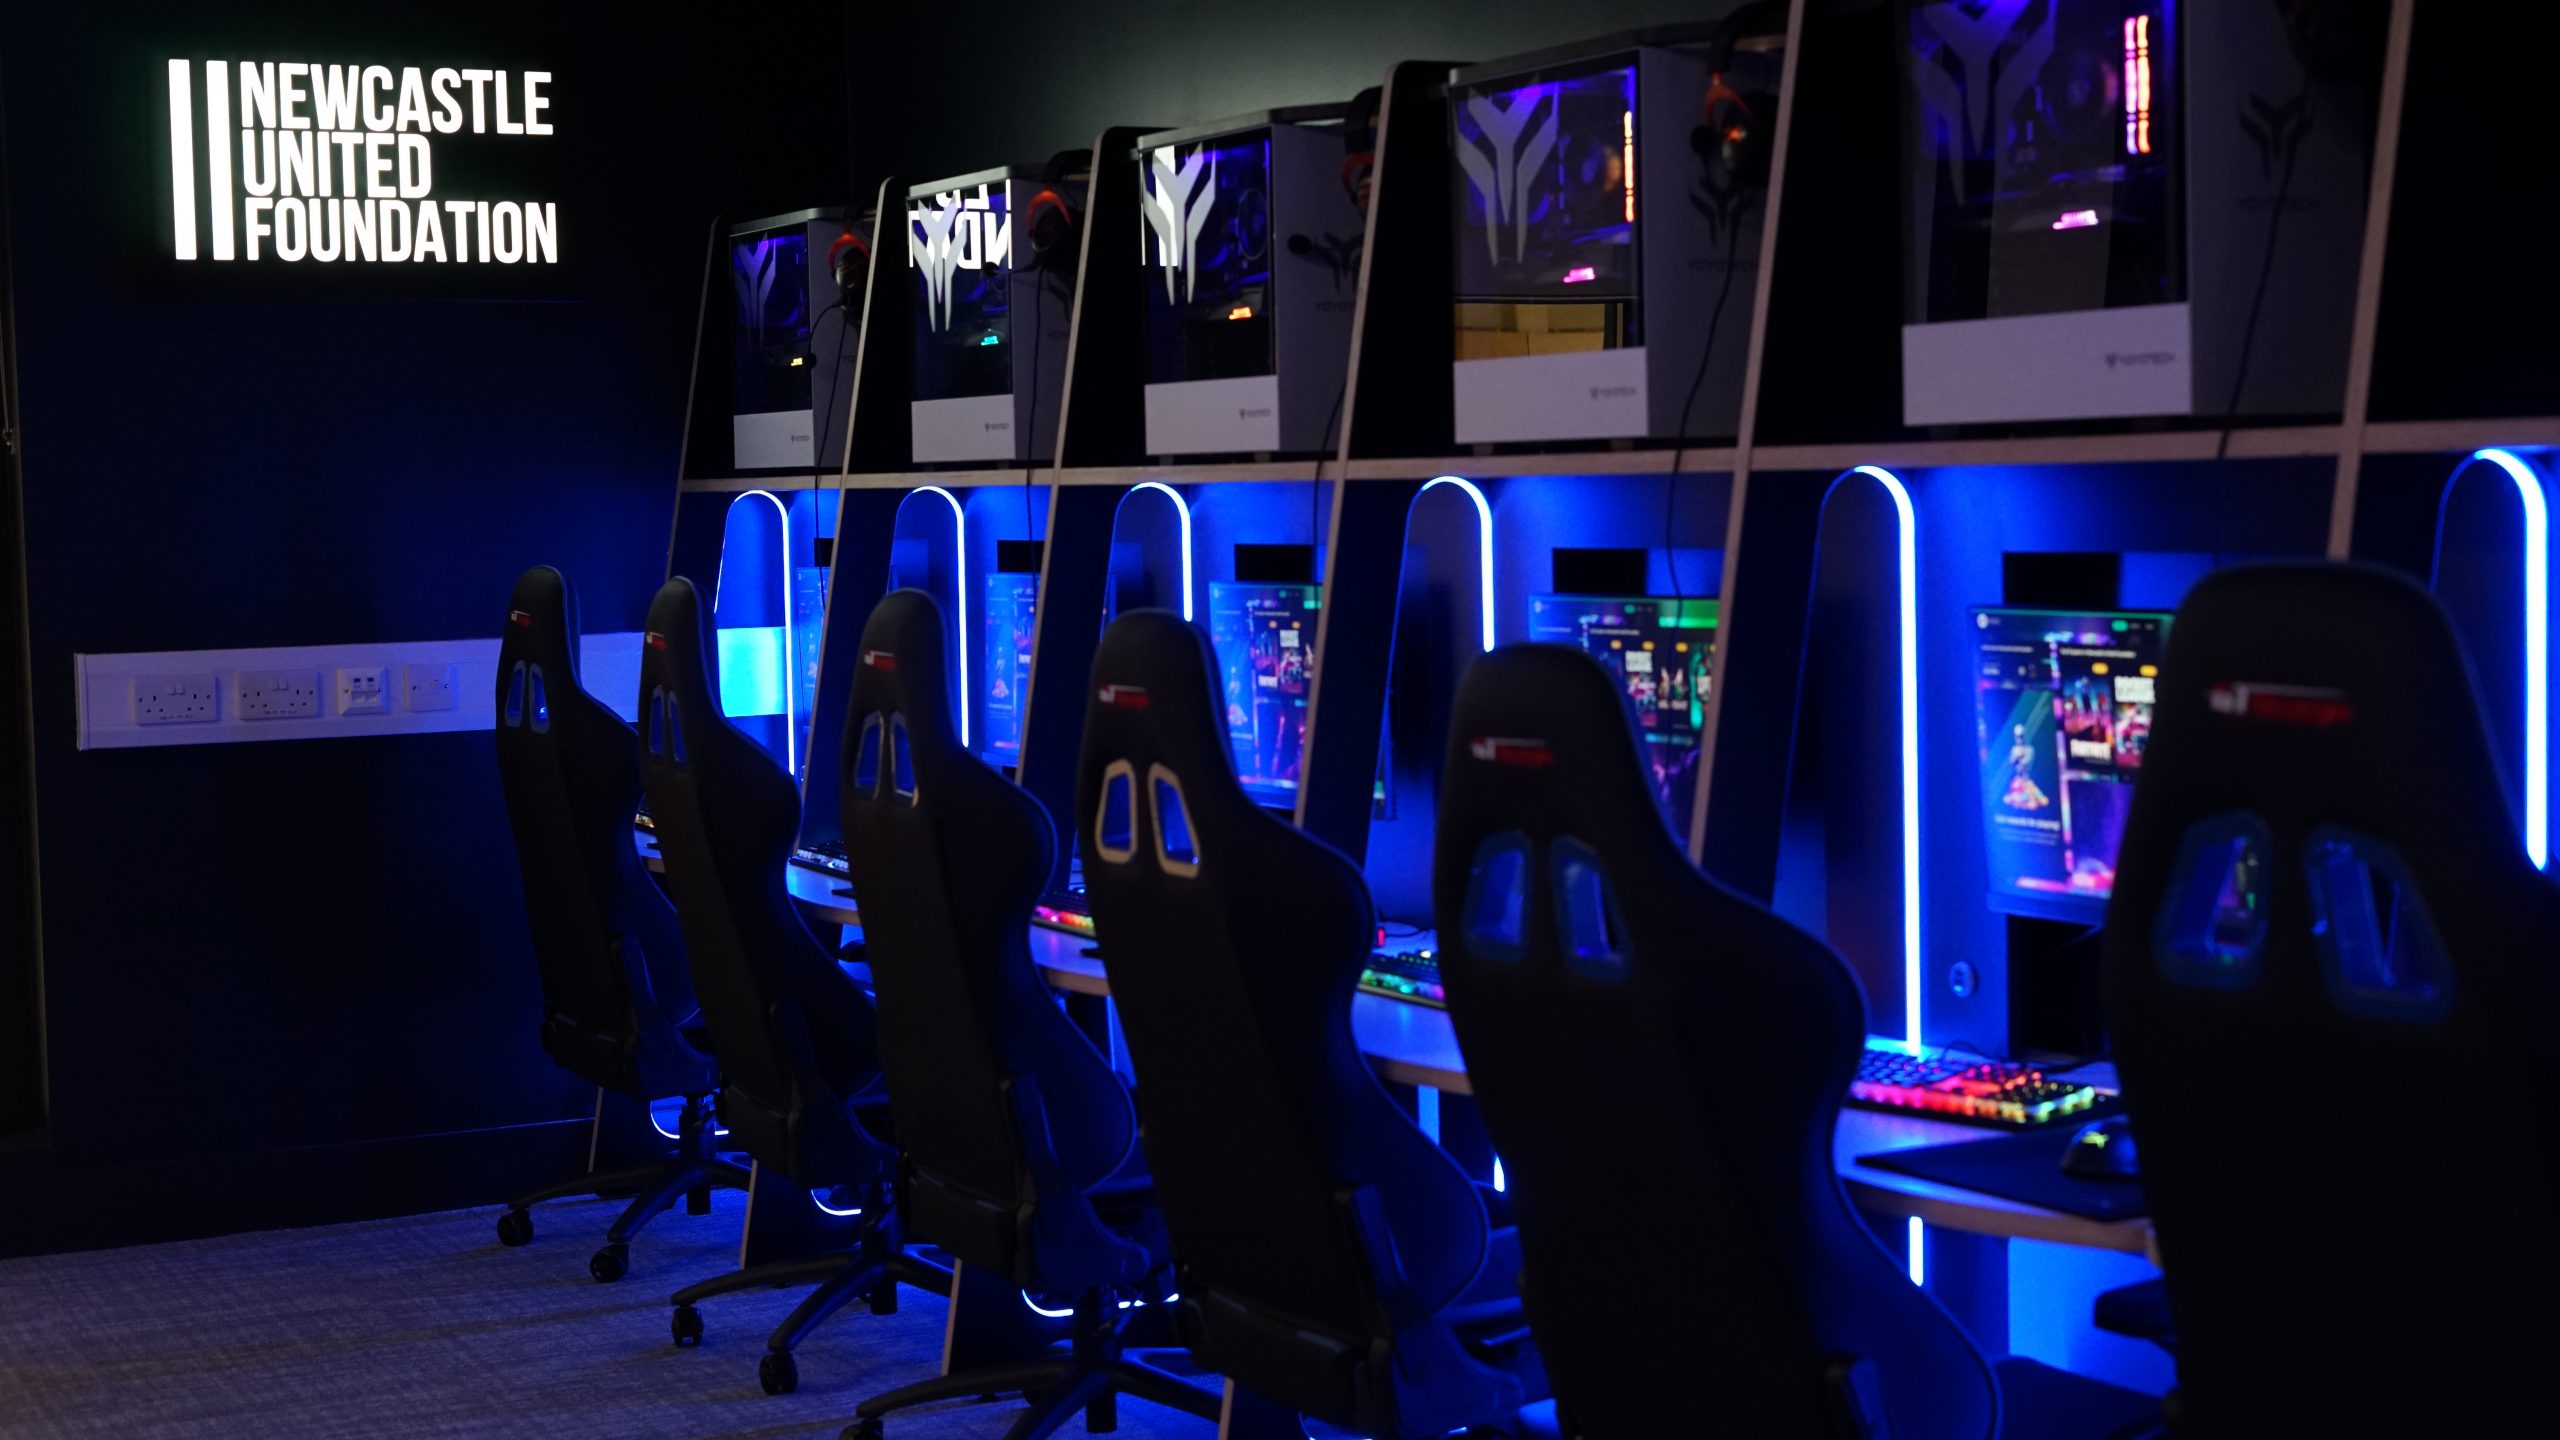 Nucastle finished esports arena showing desks and screen with lighting